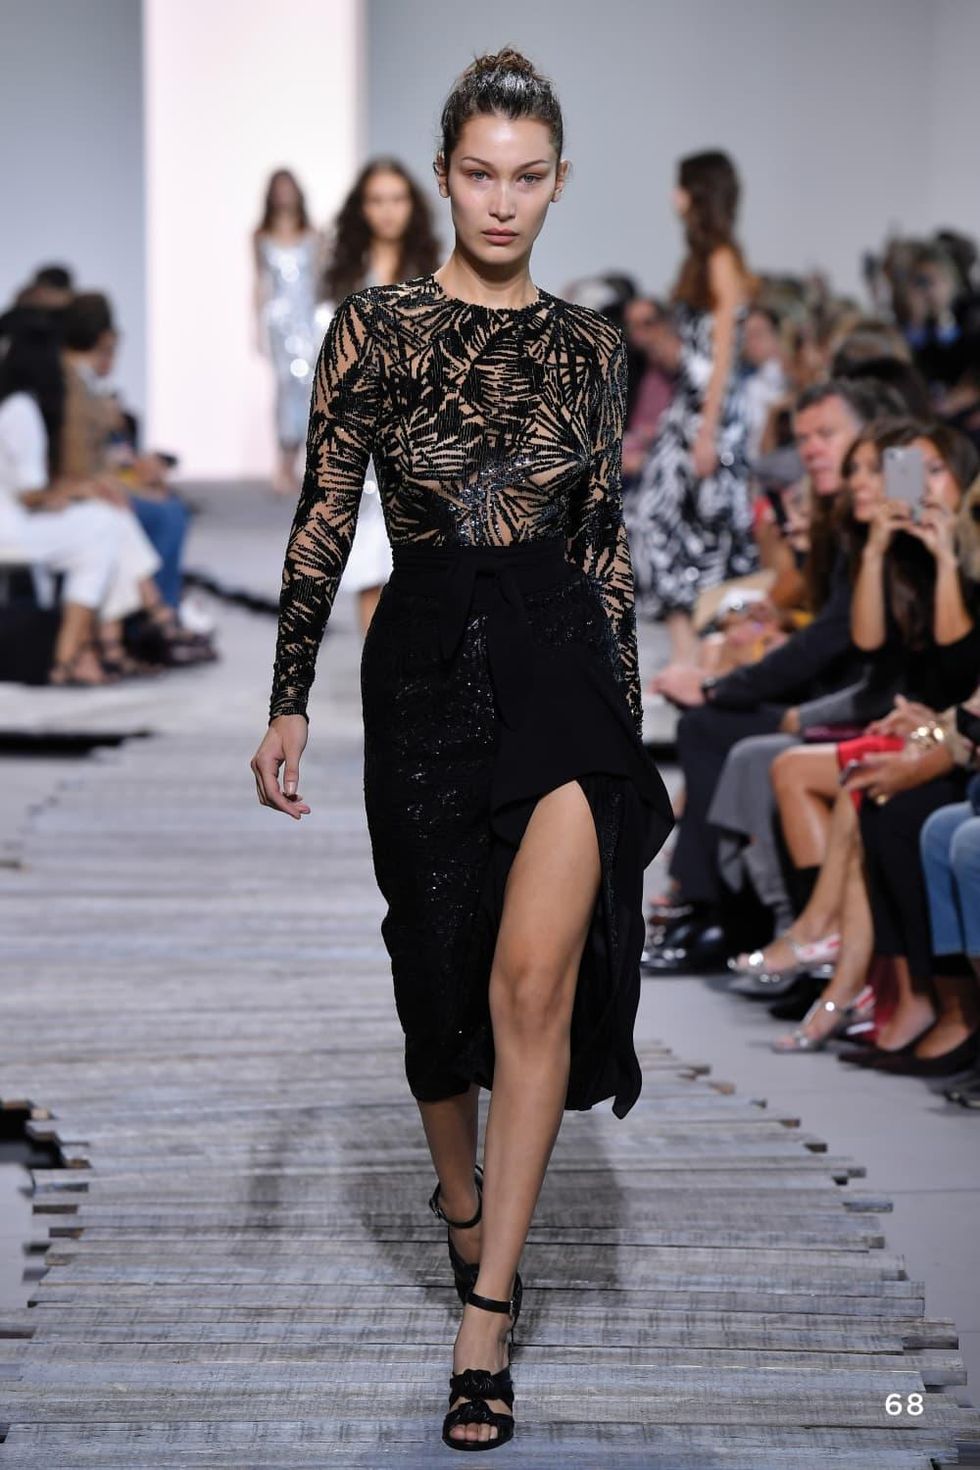 Michael Kors' breezy beach party collection mixes evening gowns and ...